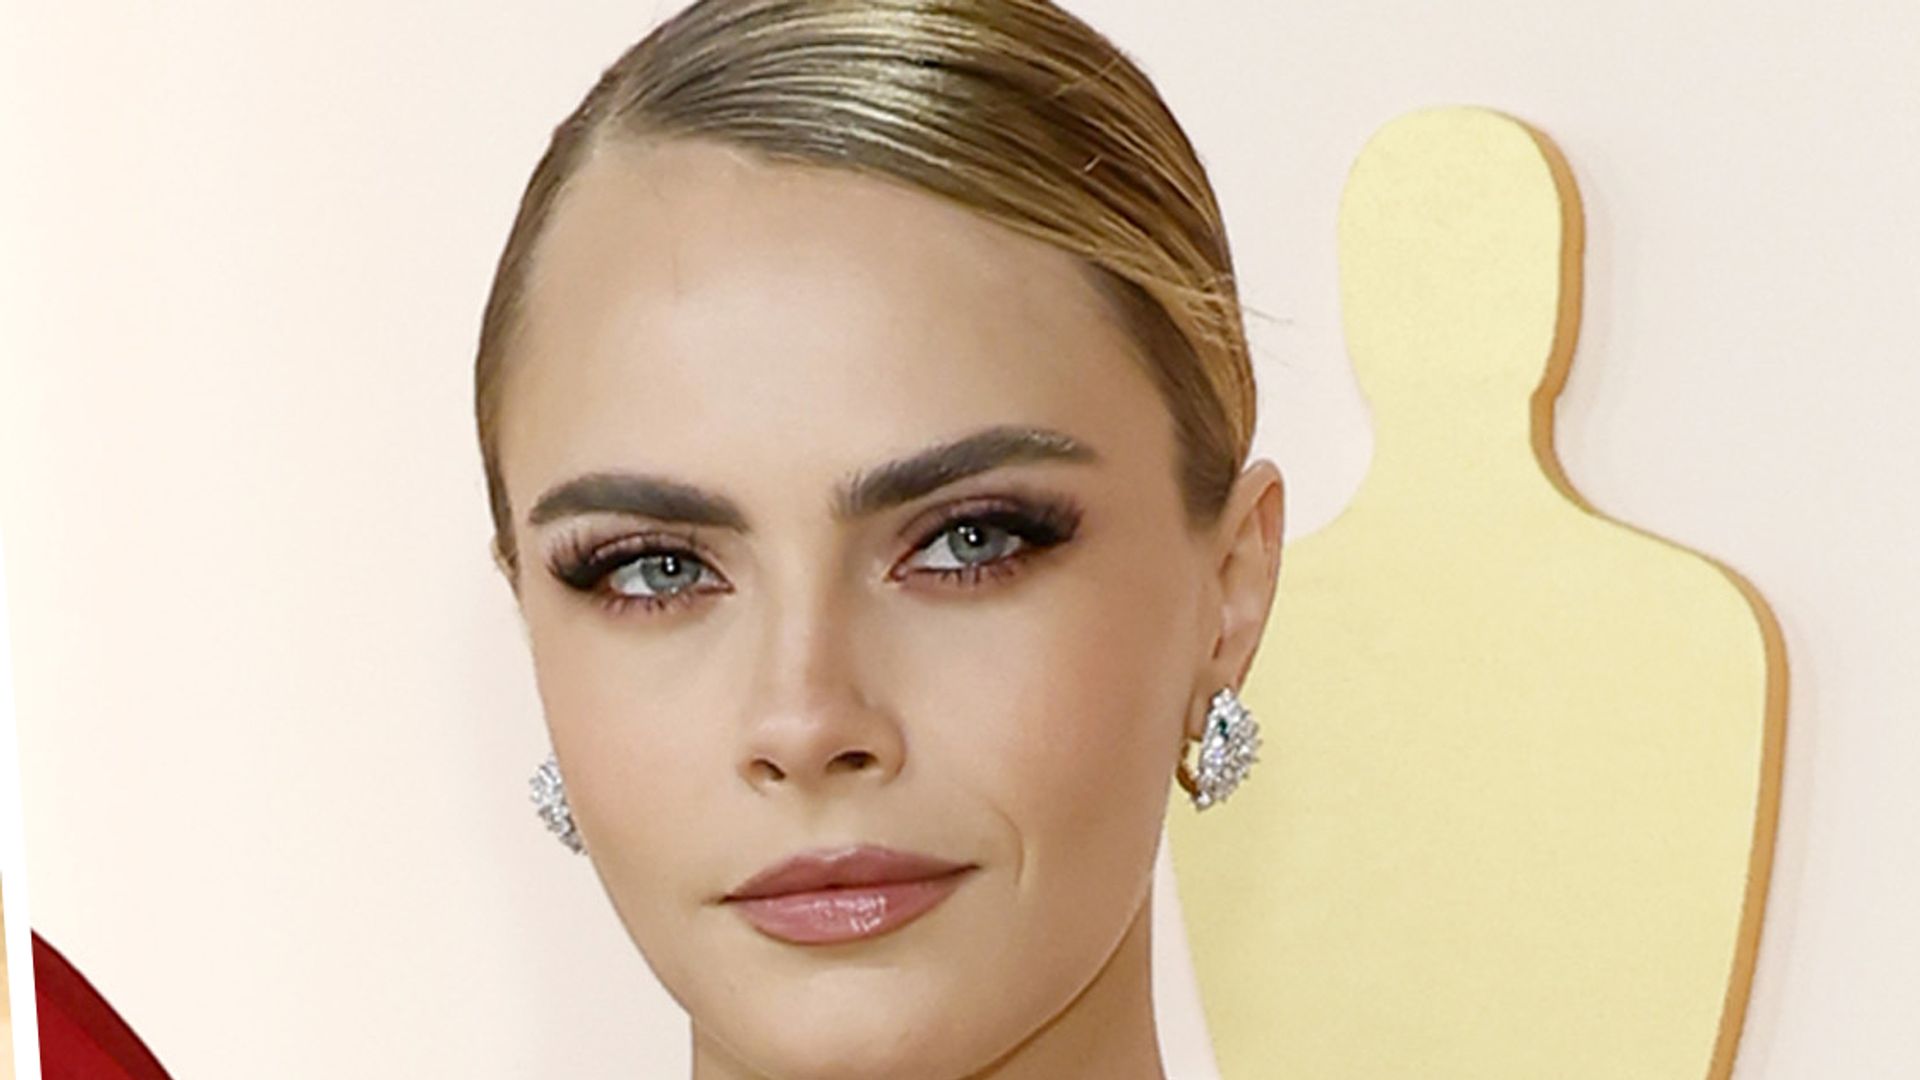 Inside Cara Delevingne's $7 million 'experiential' home that was engulfed in flames